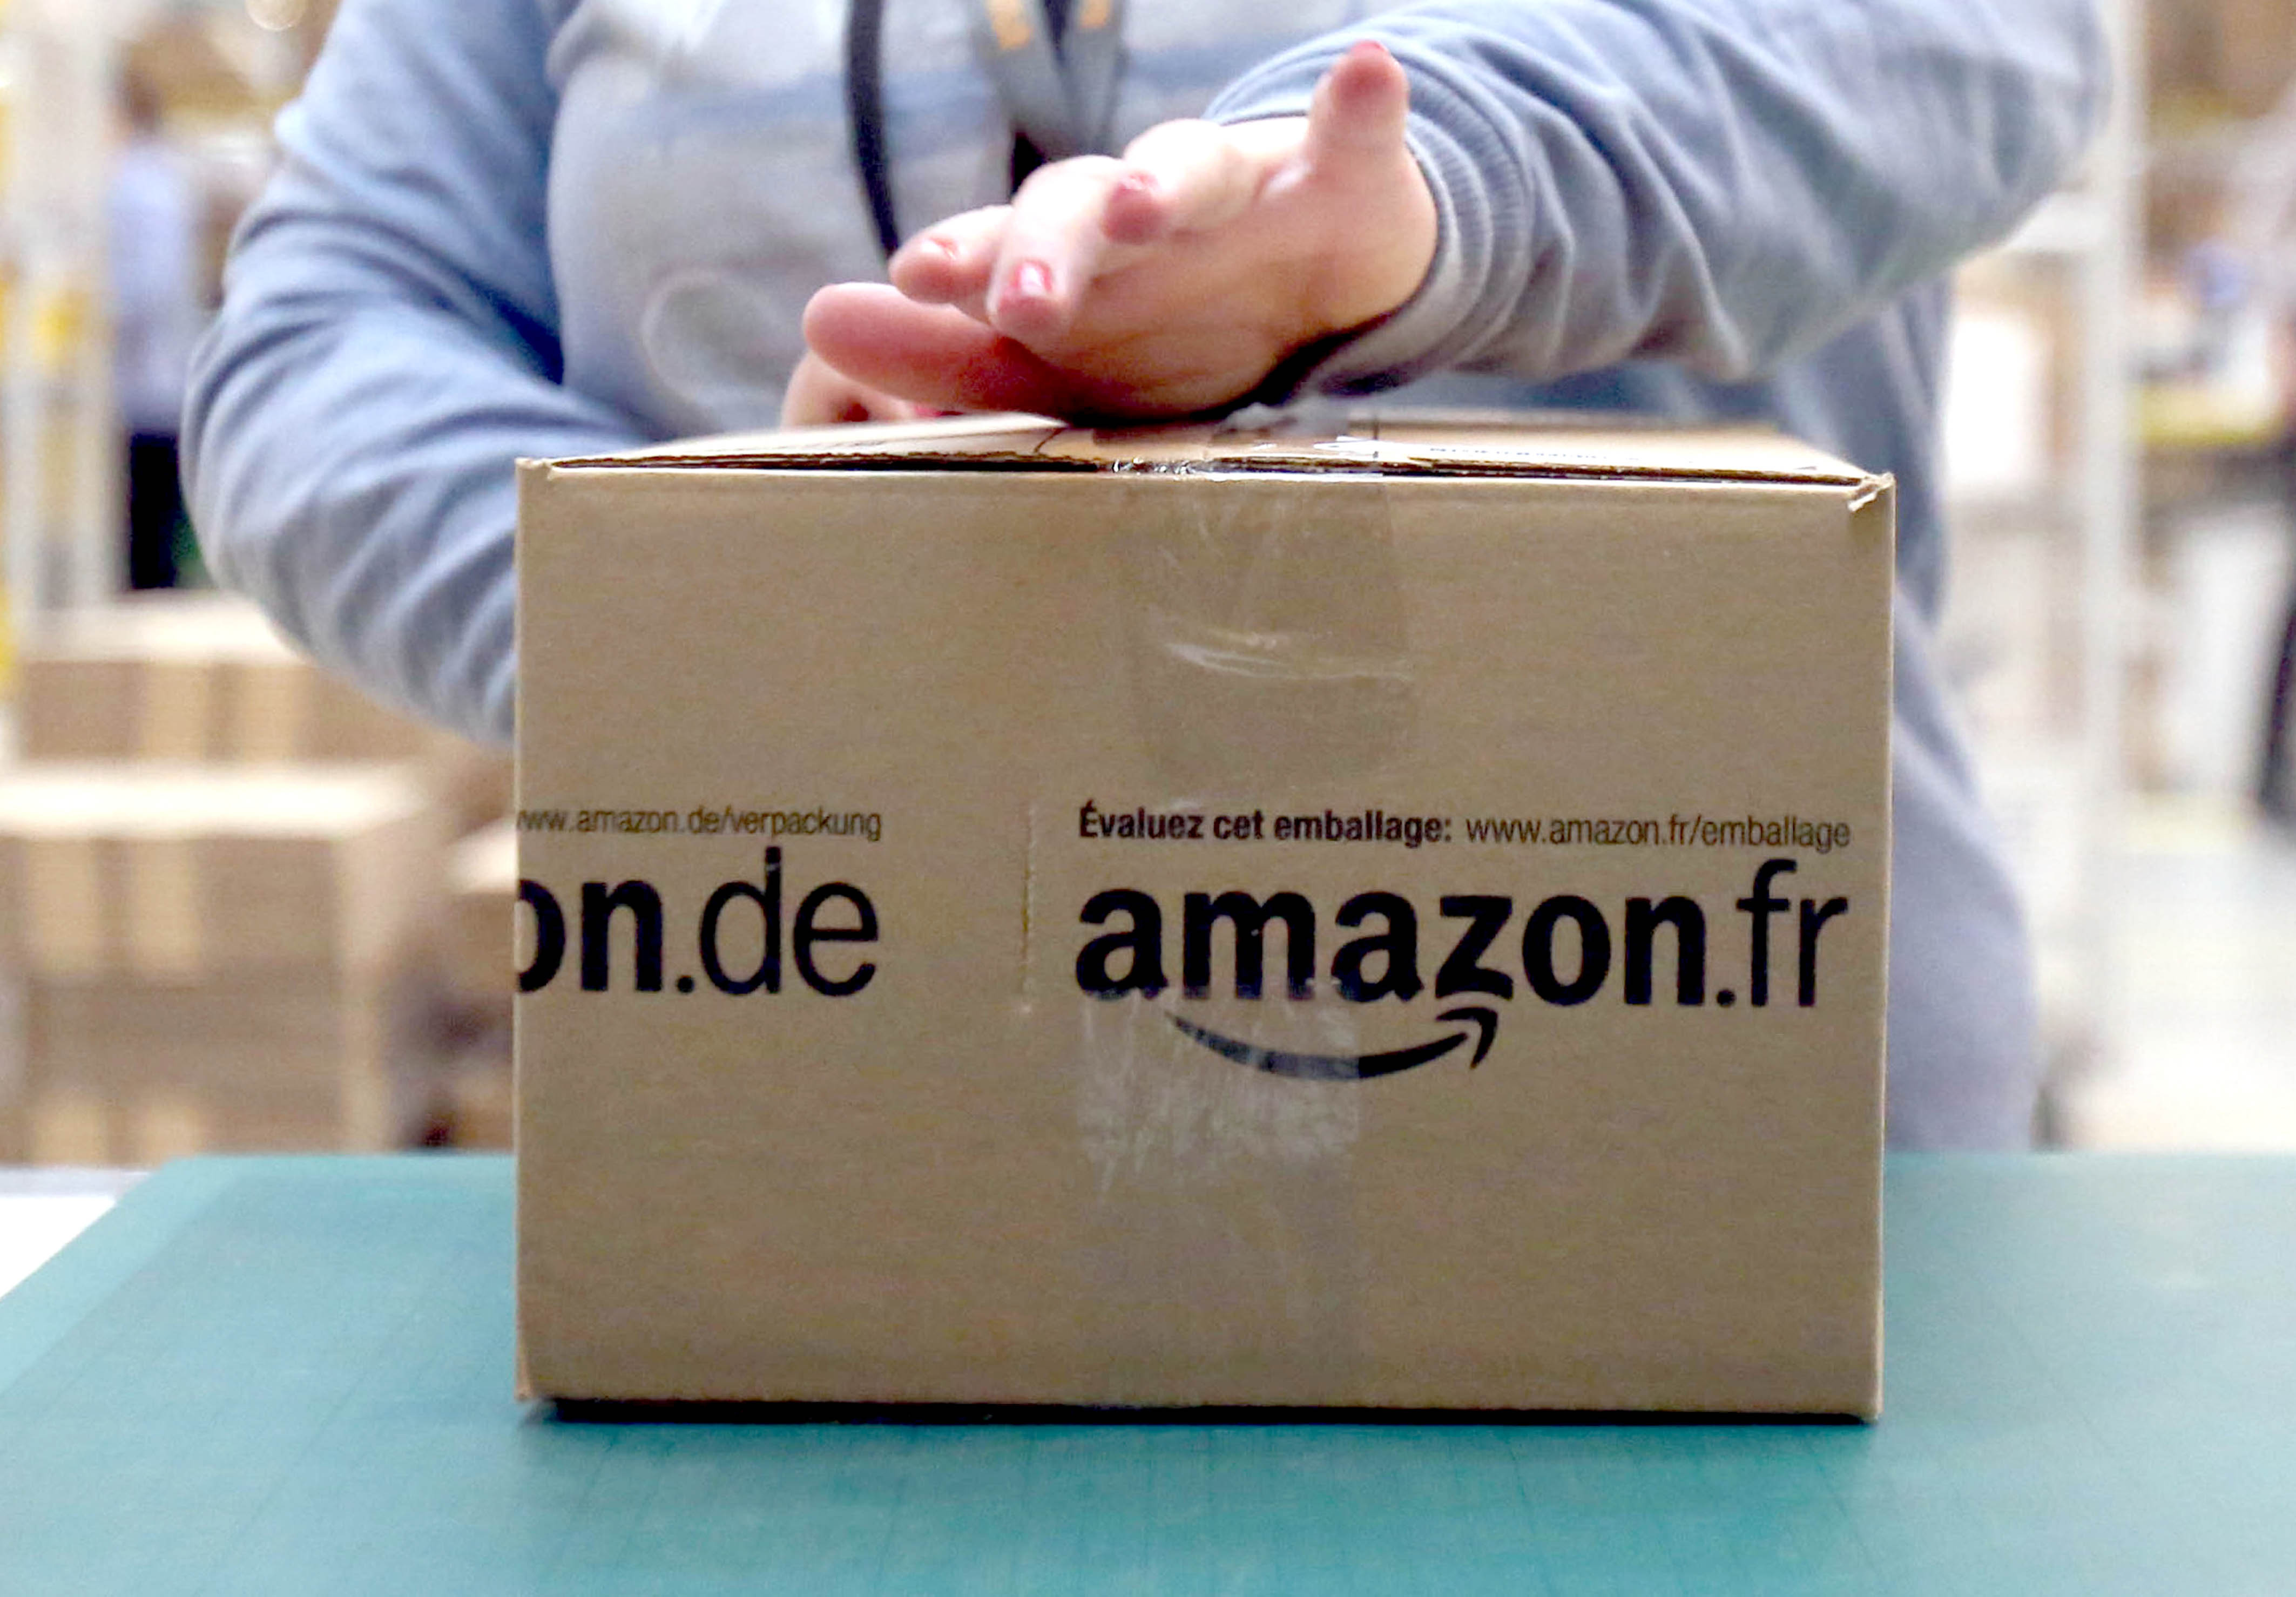 Amazon gives staff £2anhour pay rise as customers keep shopping